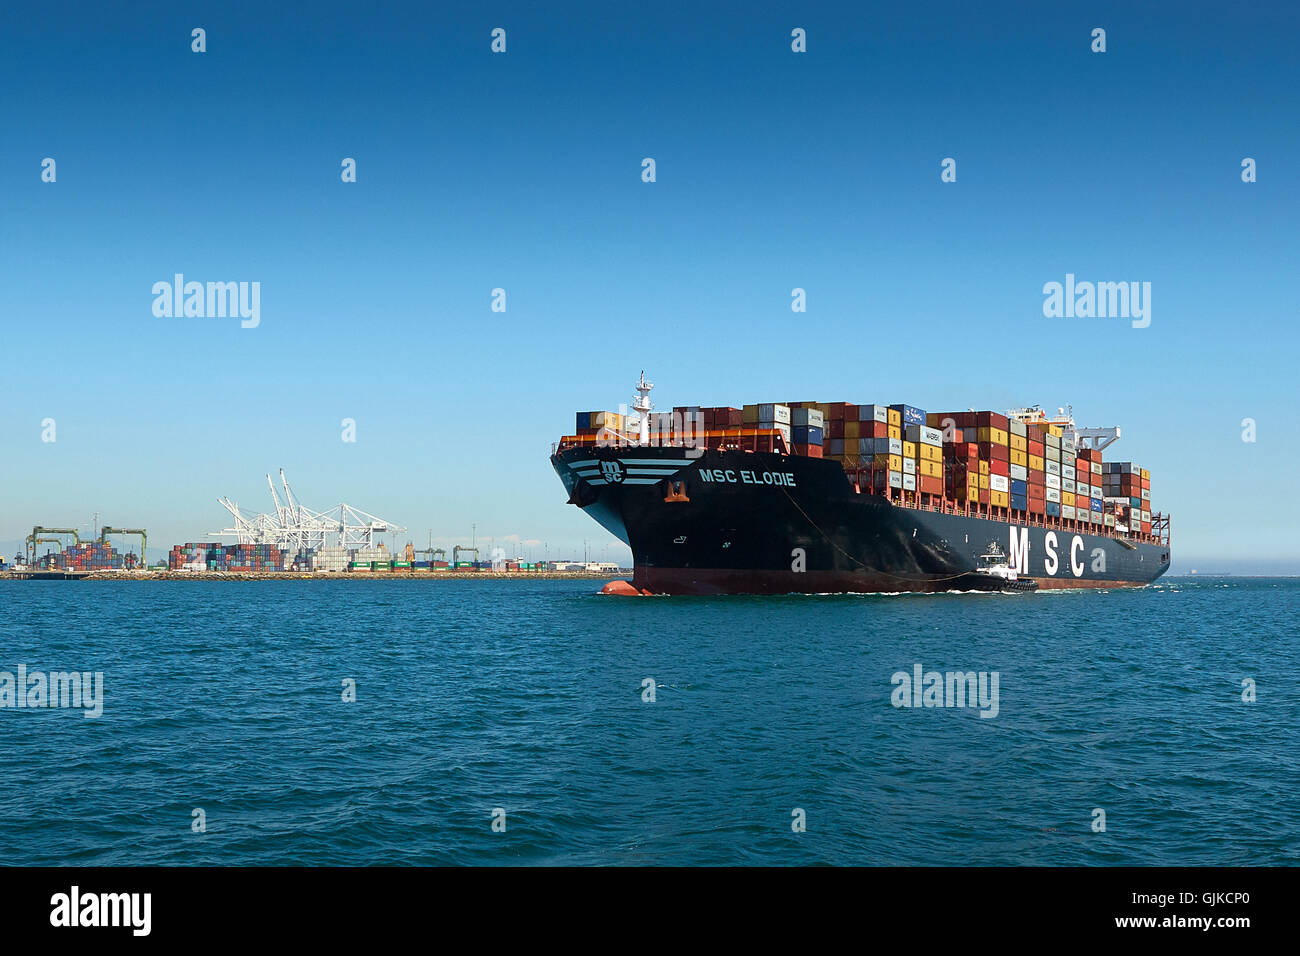 The Giant Mediterranean Shipping Company Container Ship, MSC Elodie, Arrives In The Port Of Long Beach, California, USA. Stock Photo